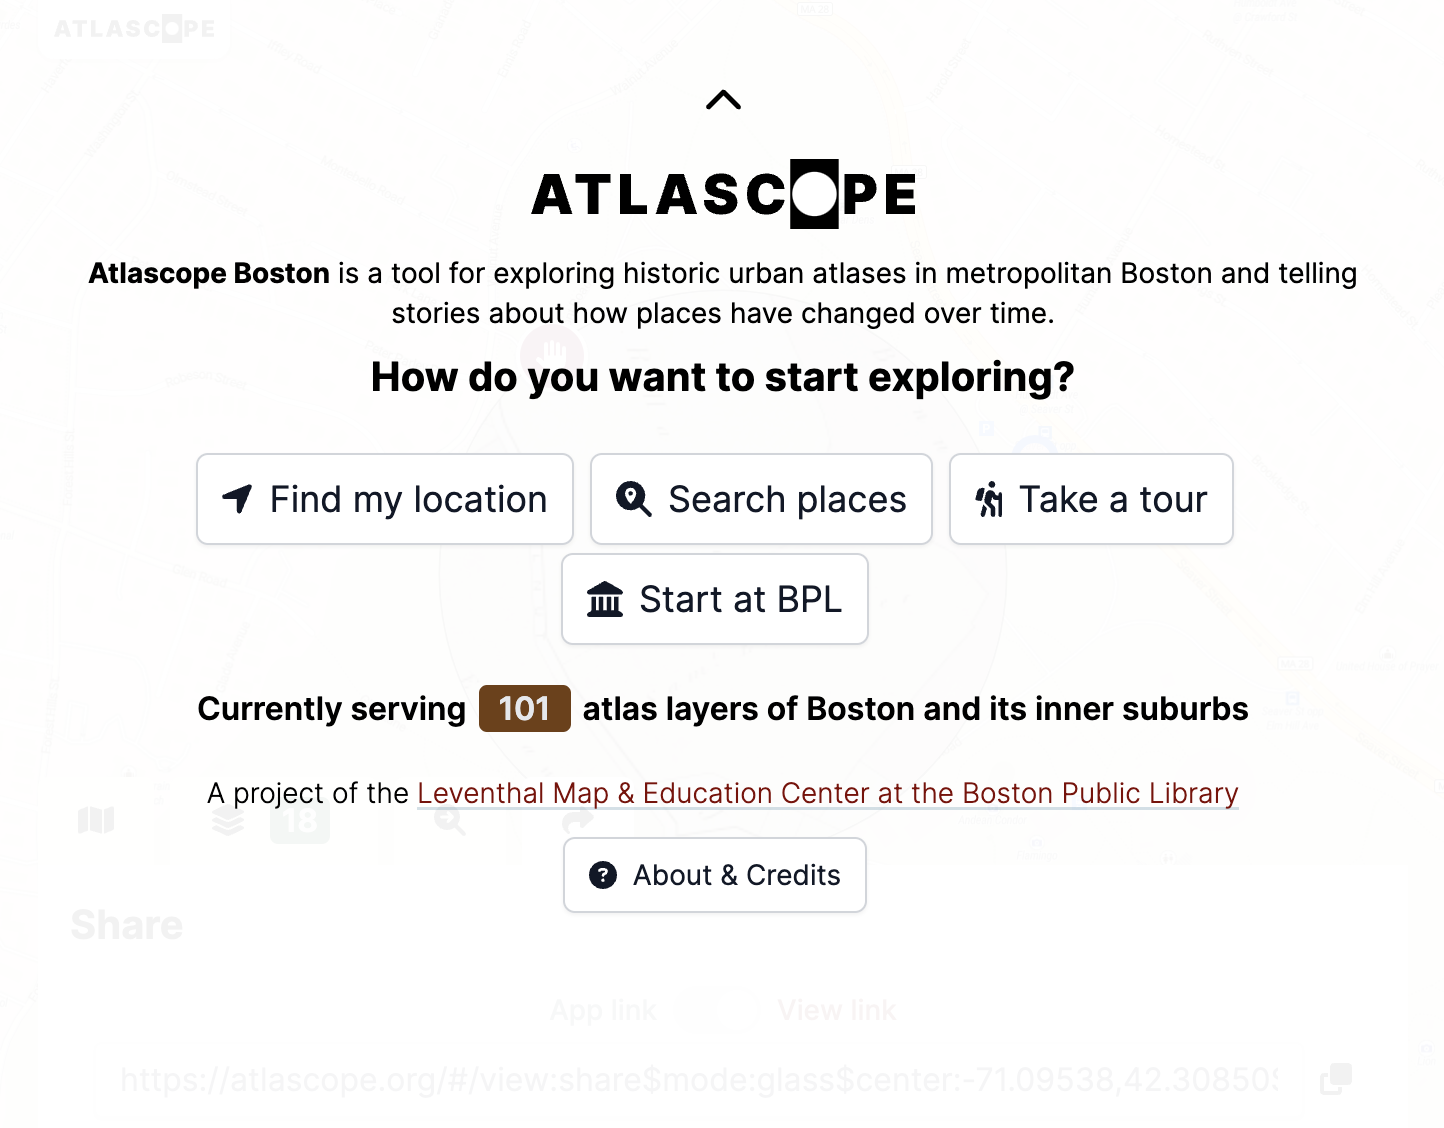 What will you discover in Atlascope?